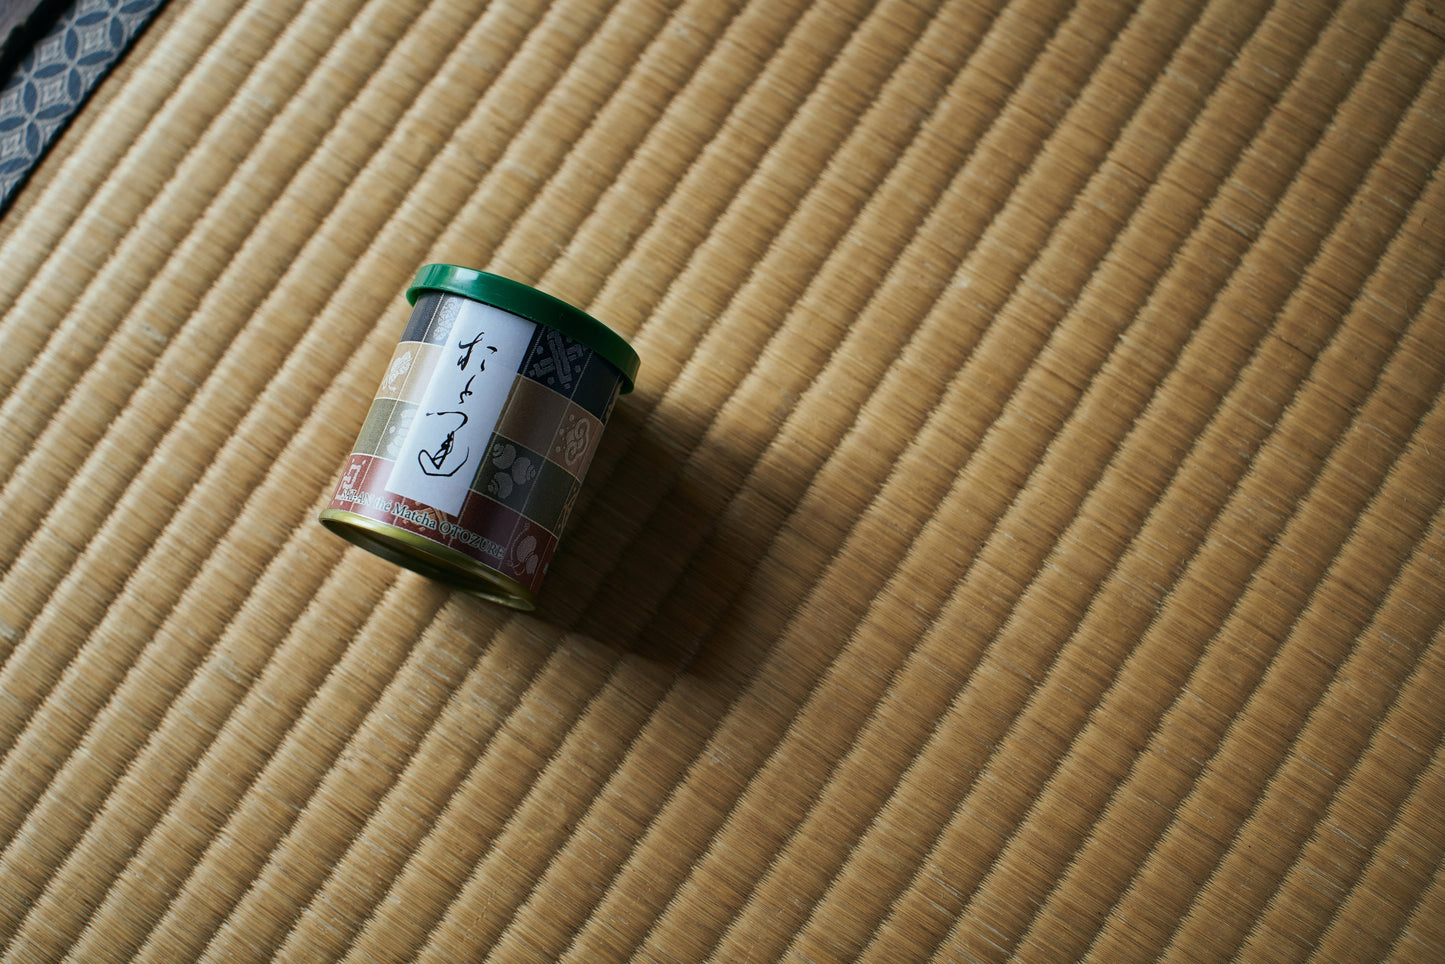 Matcha Subscription (4 cans every 2 months)